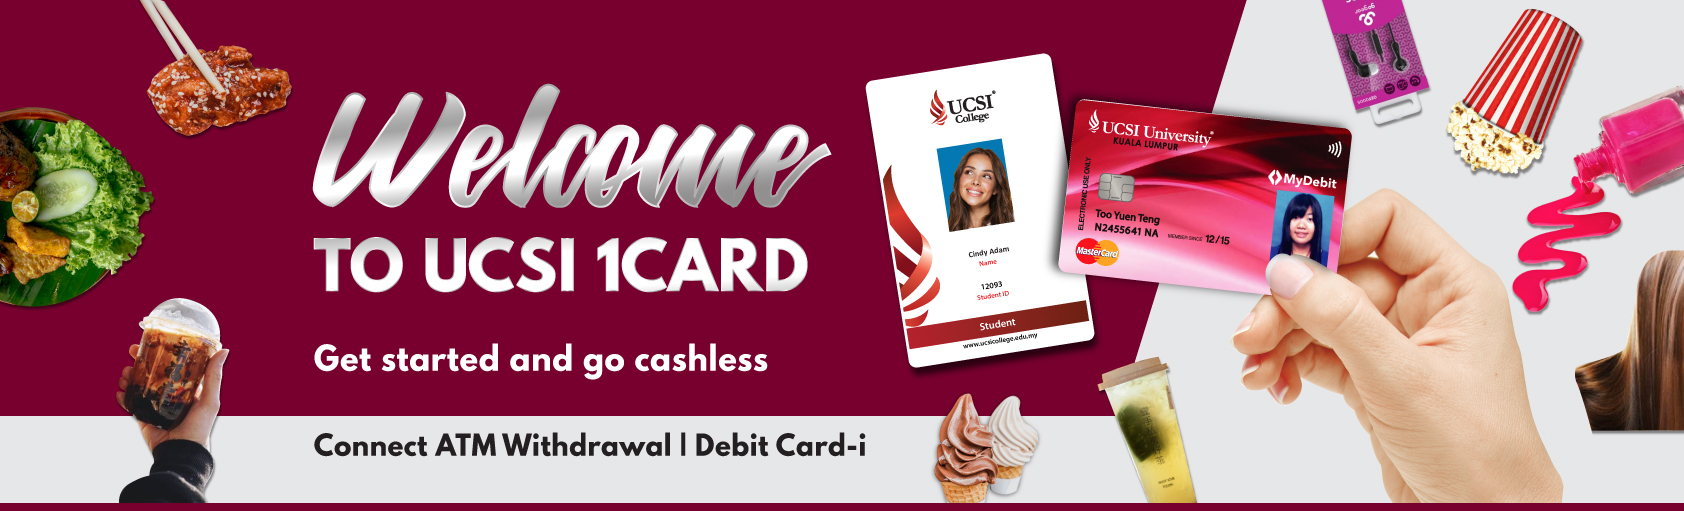 Welcome to UCSI1Card